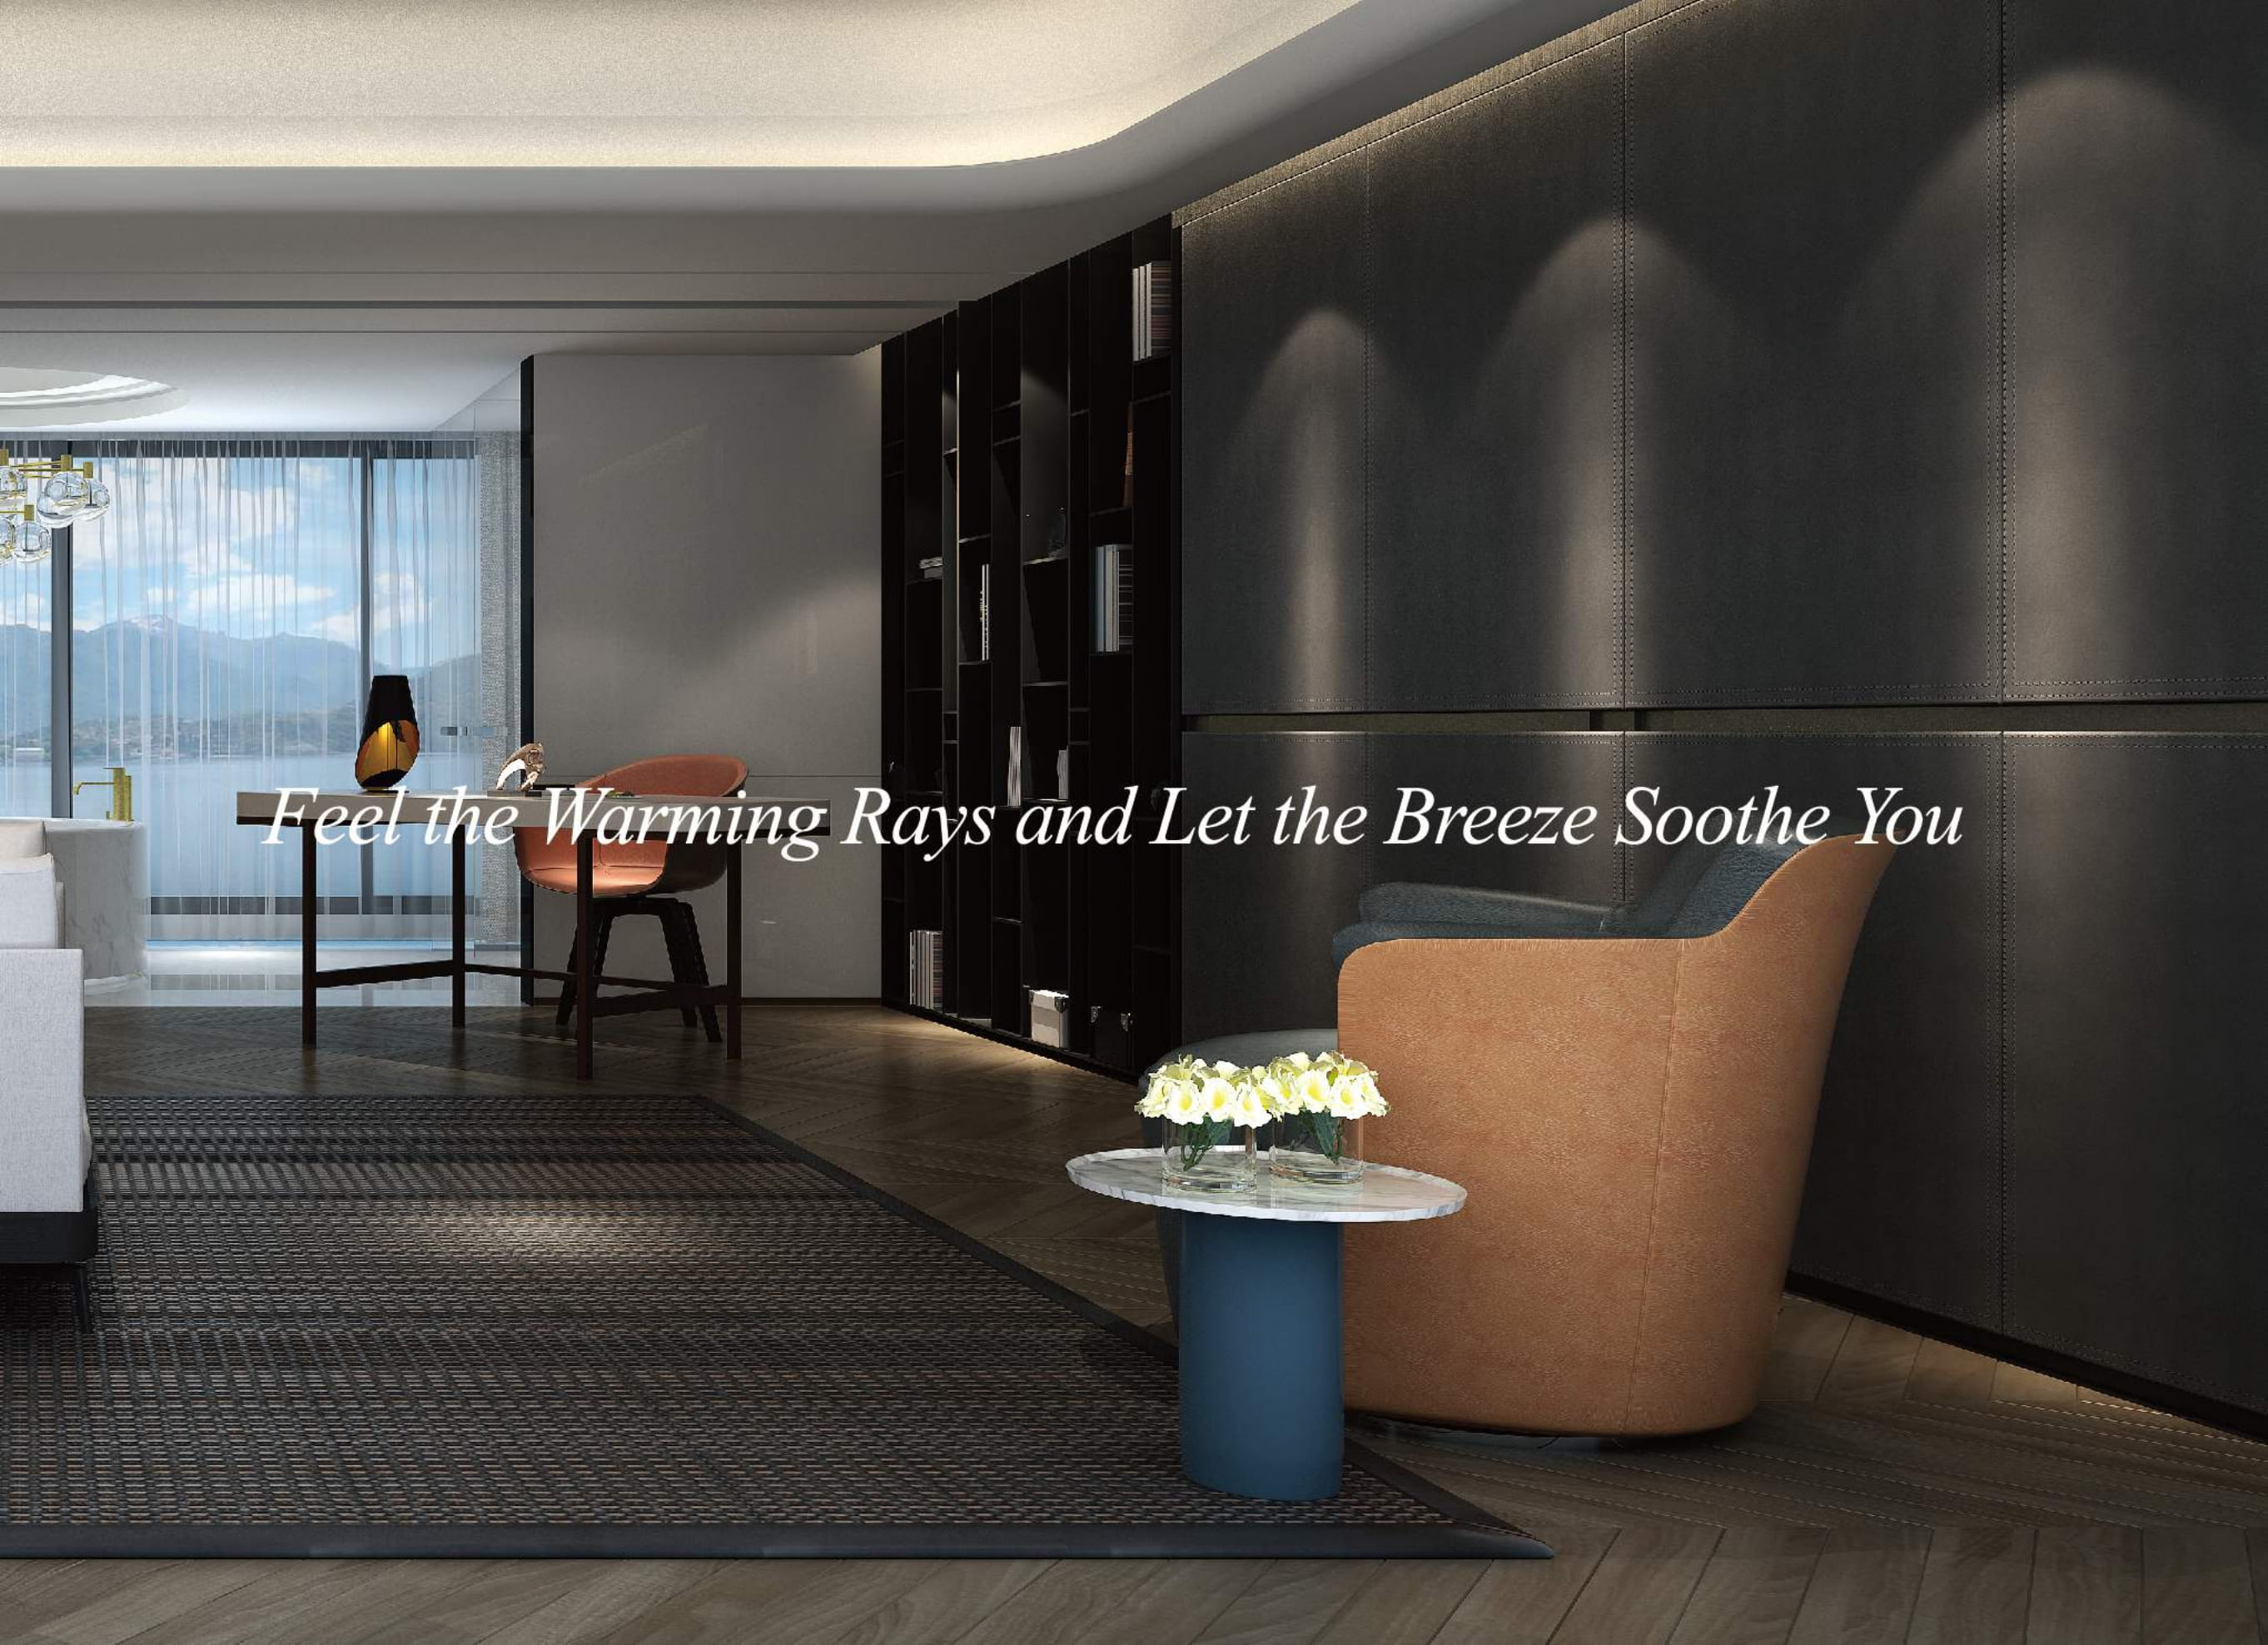 TRIBOA MAJESTIC BAY - the Ultra-high residential destination at Subic Bay